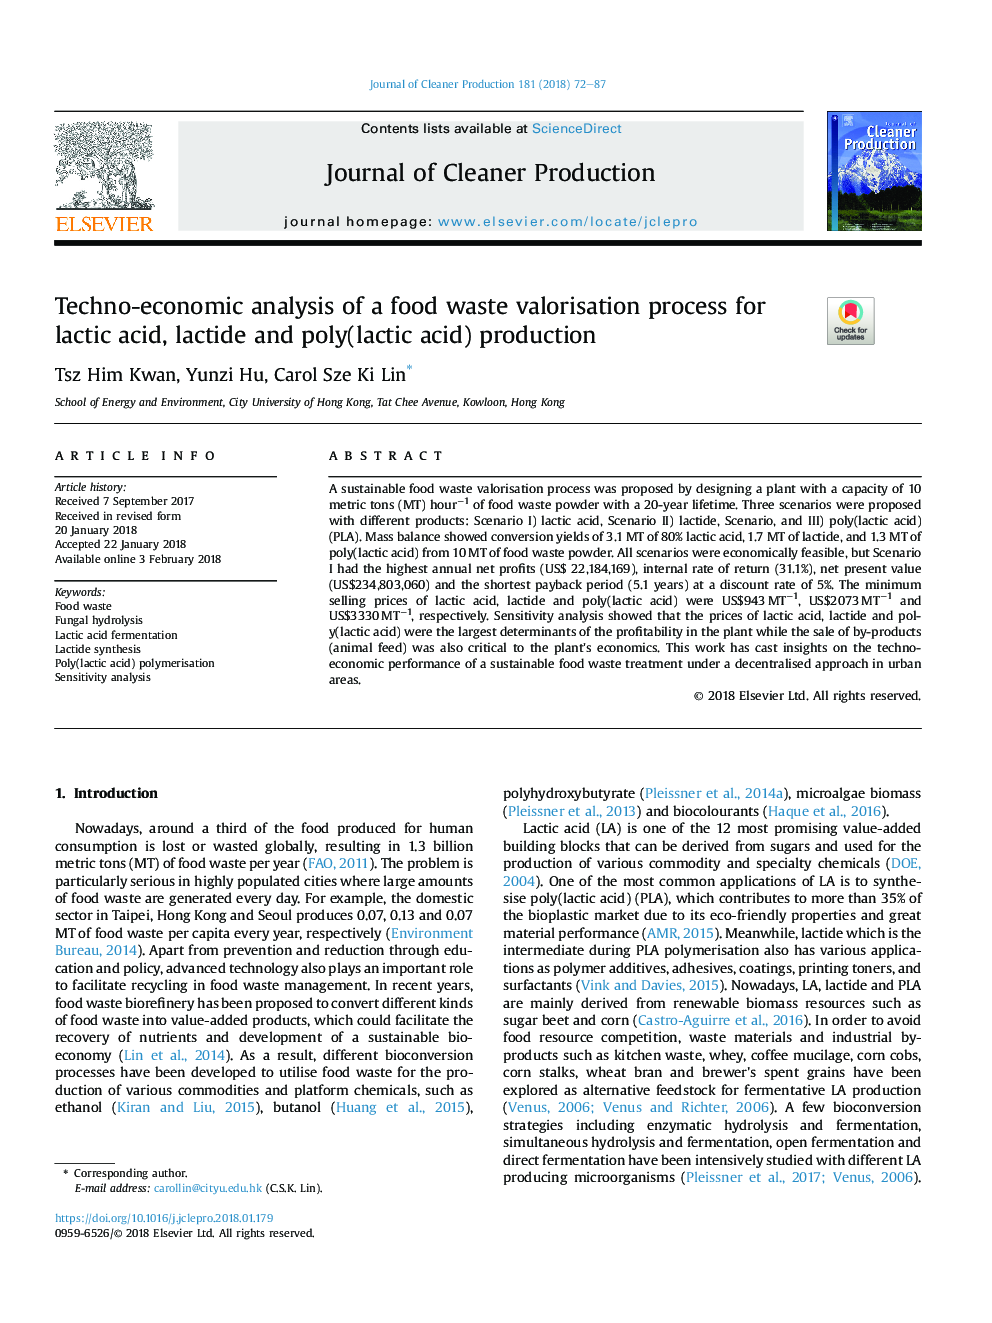 Techno-economic analysis of a food waste valorisation process for lactic acid, lactide and poly(lactic acid) production